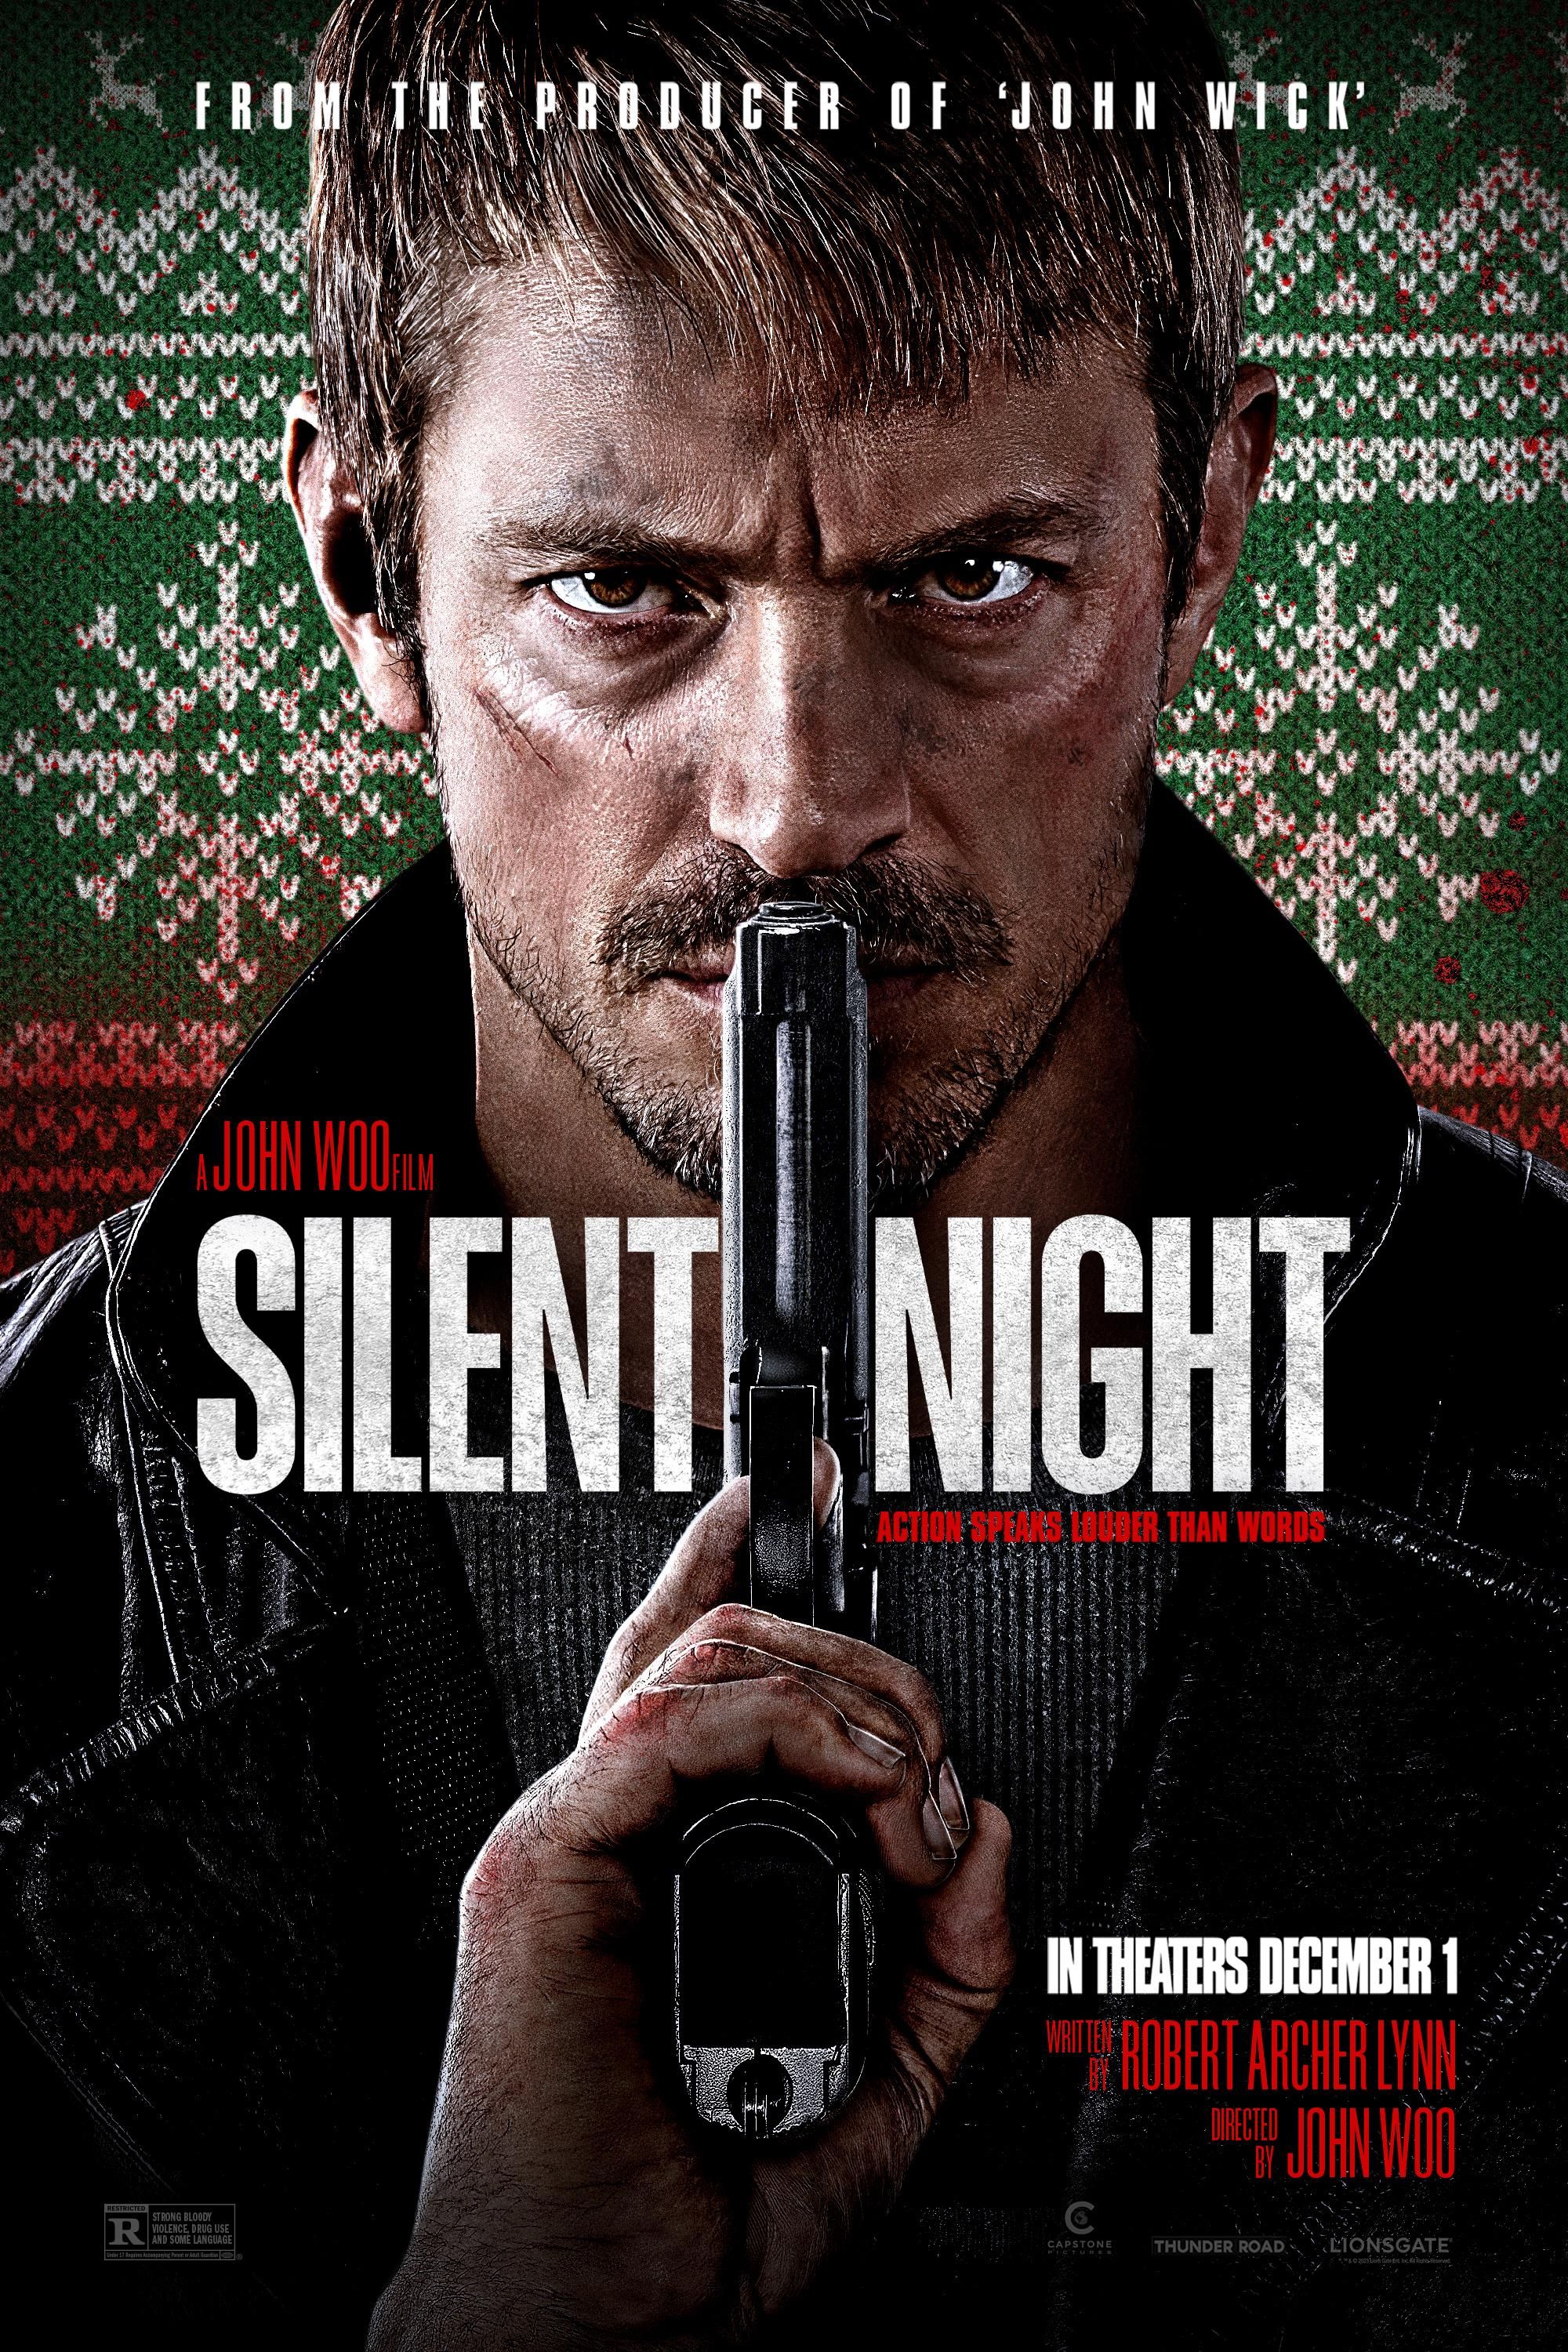 Where to Watch 'Silent Night' Find Showtimes